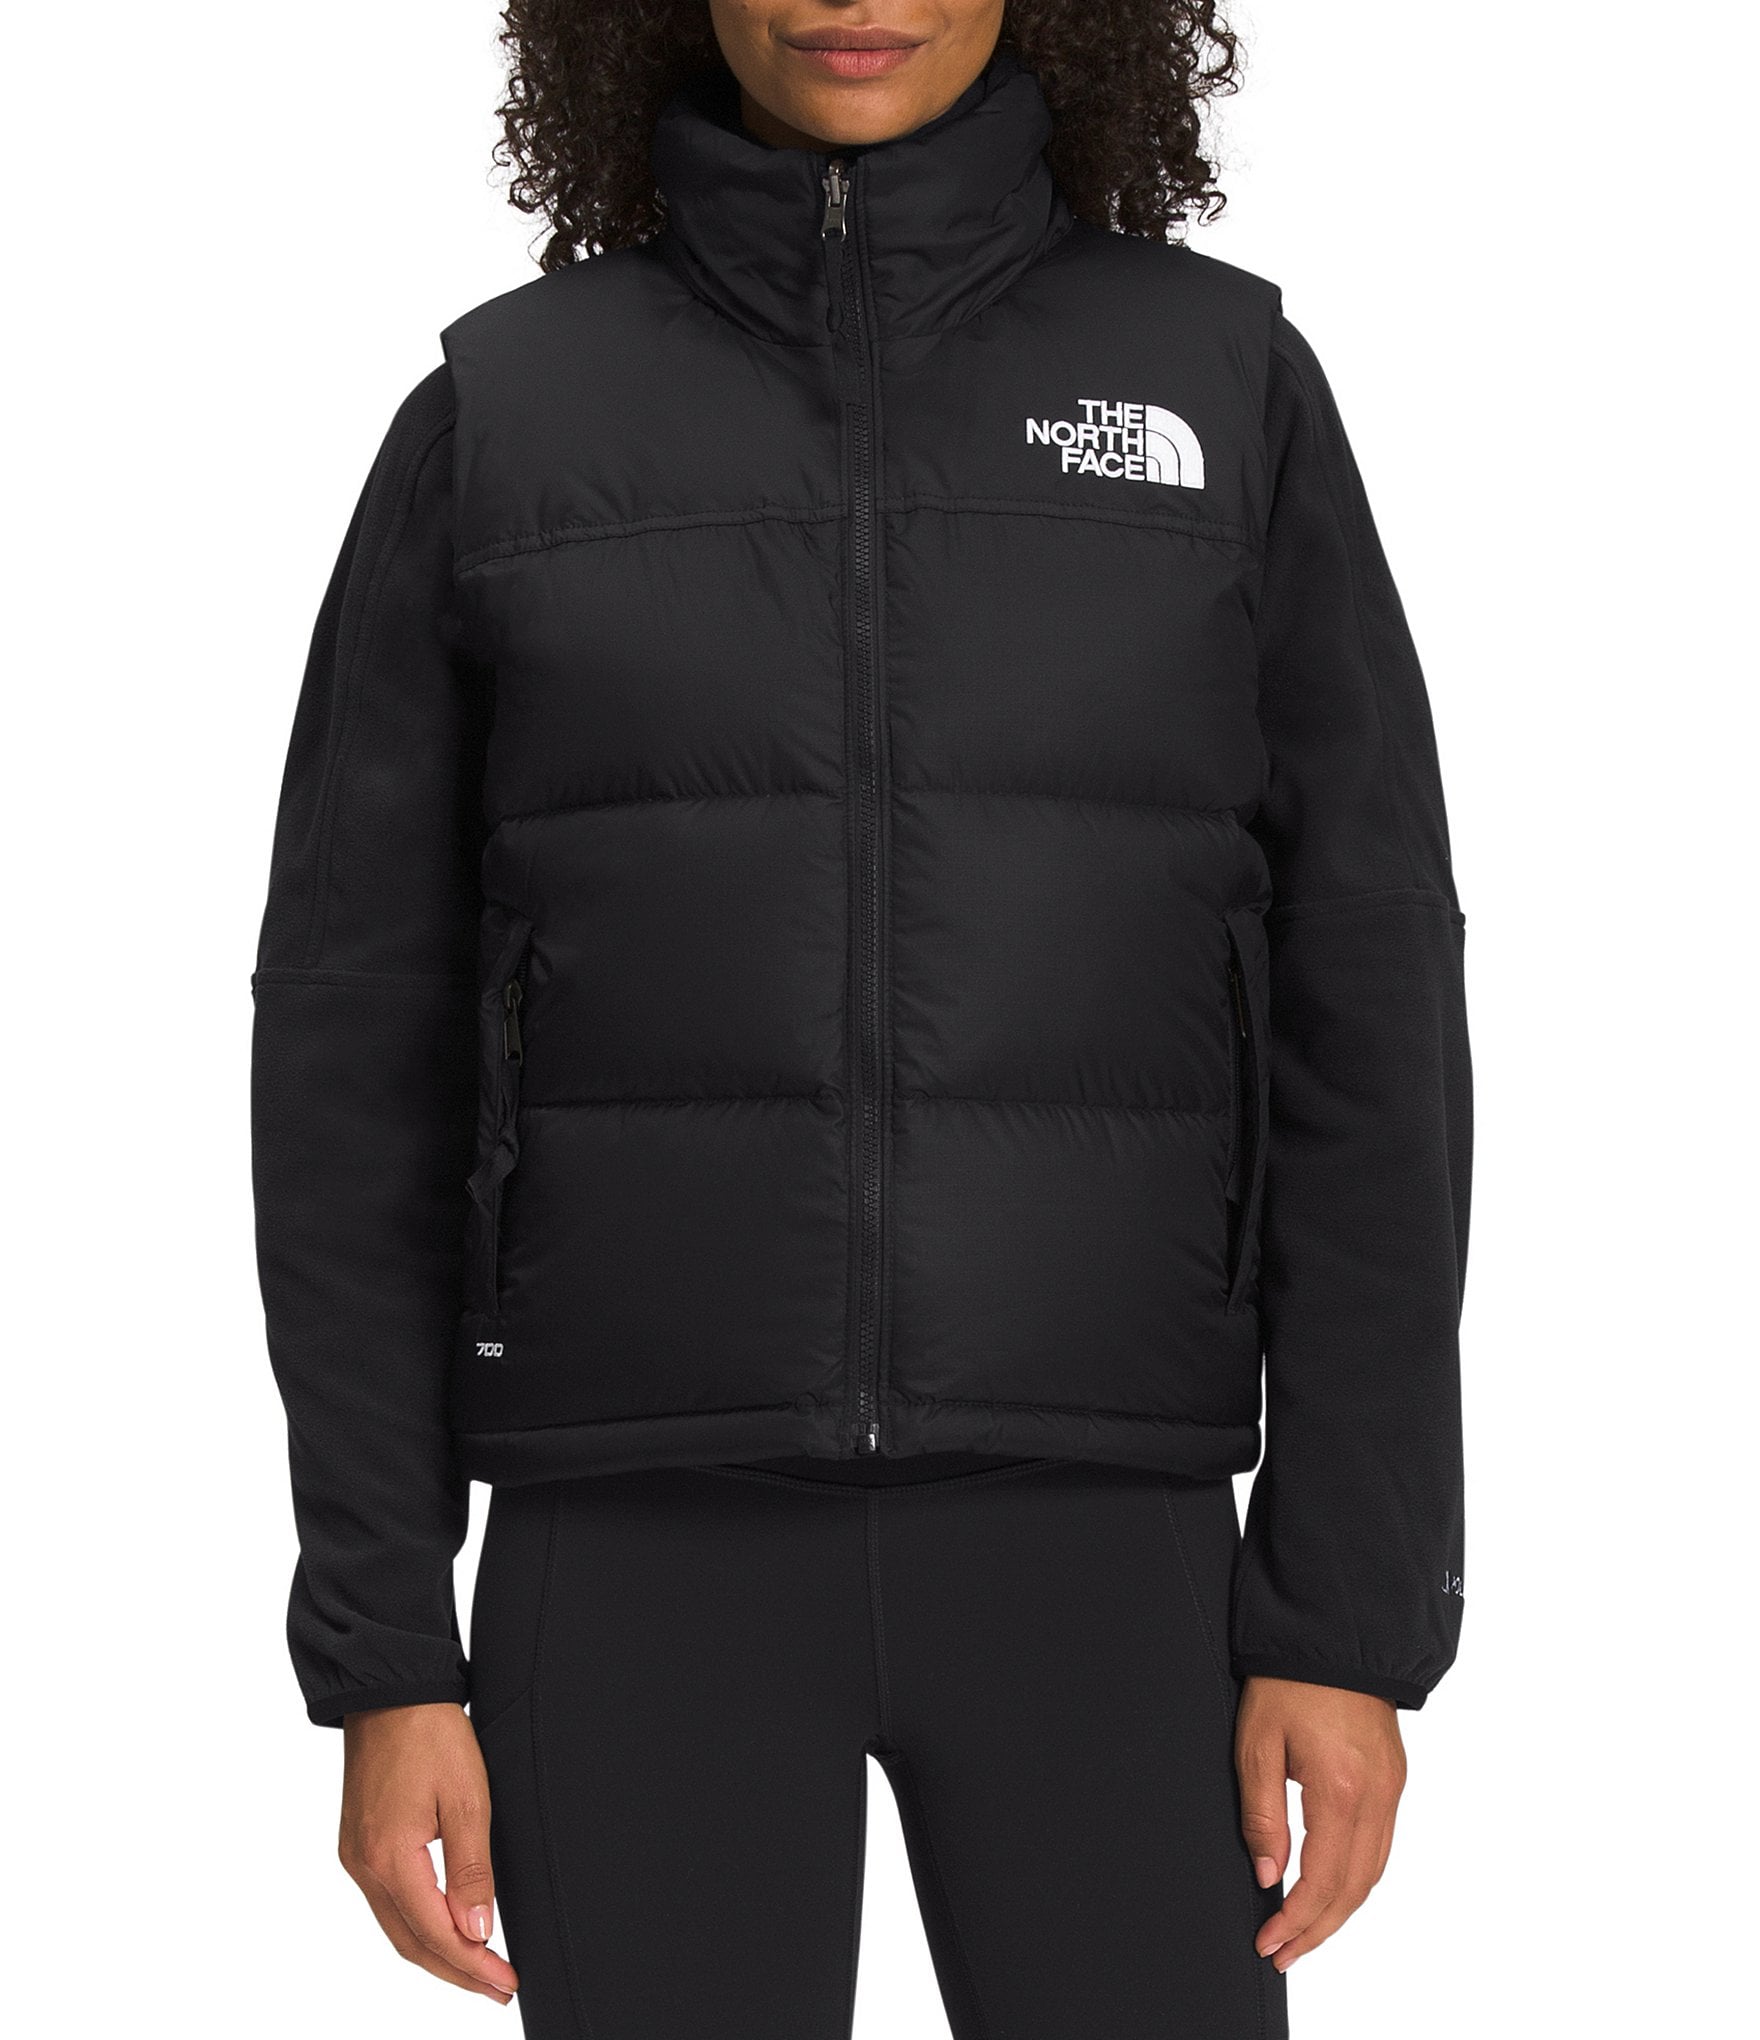 The North Face Women's Vests